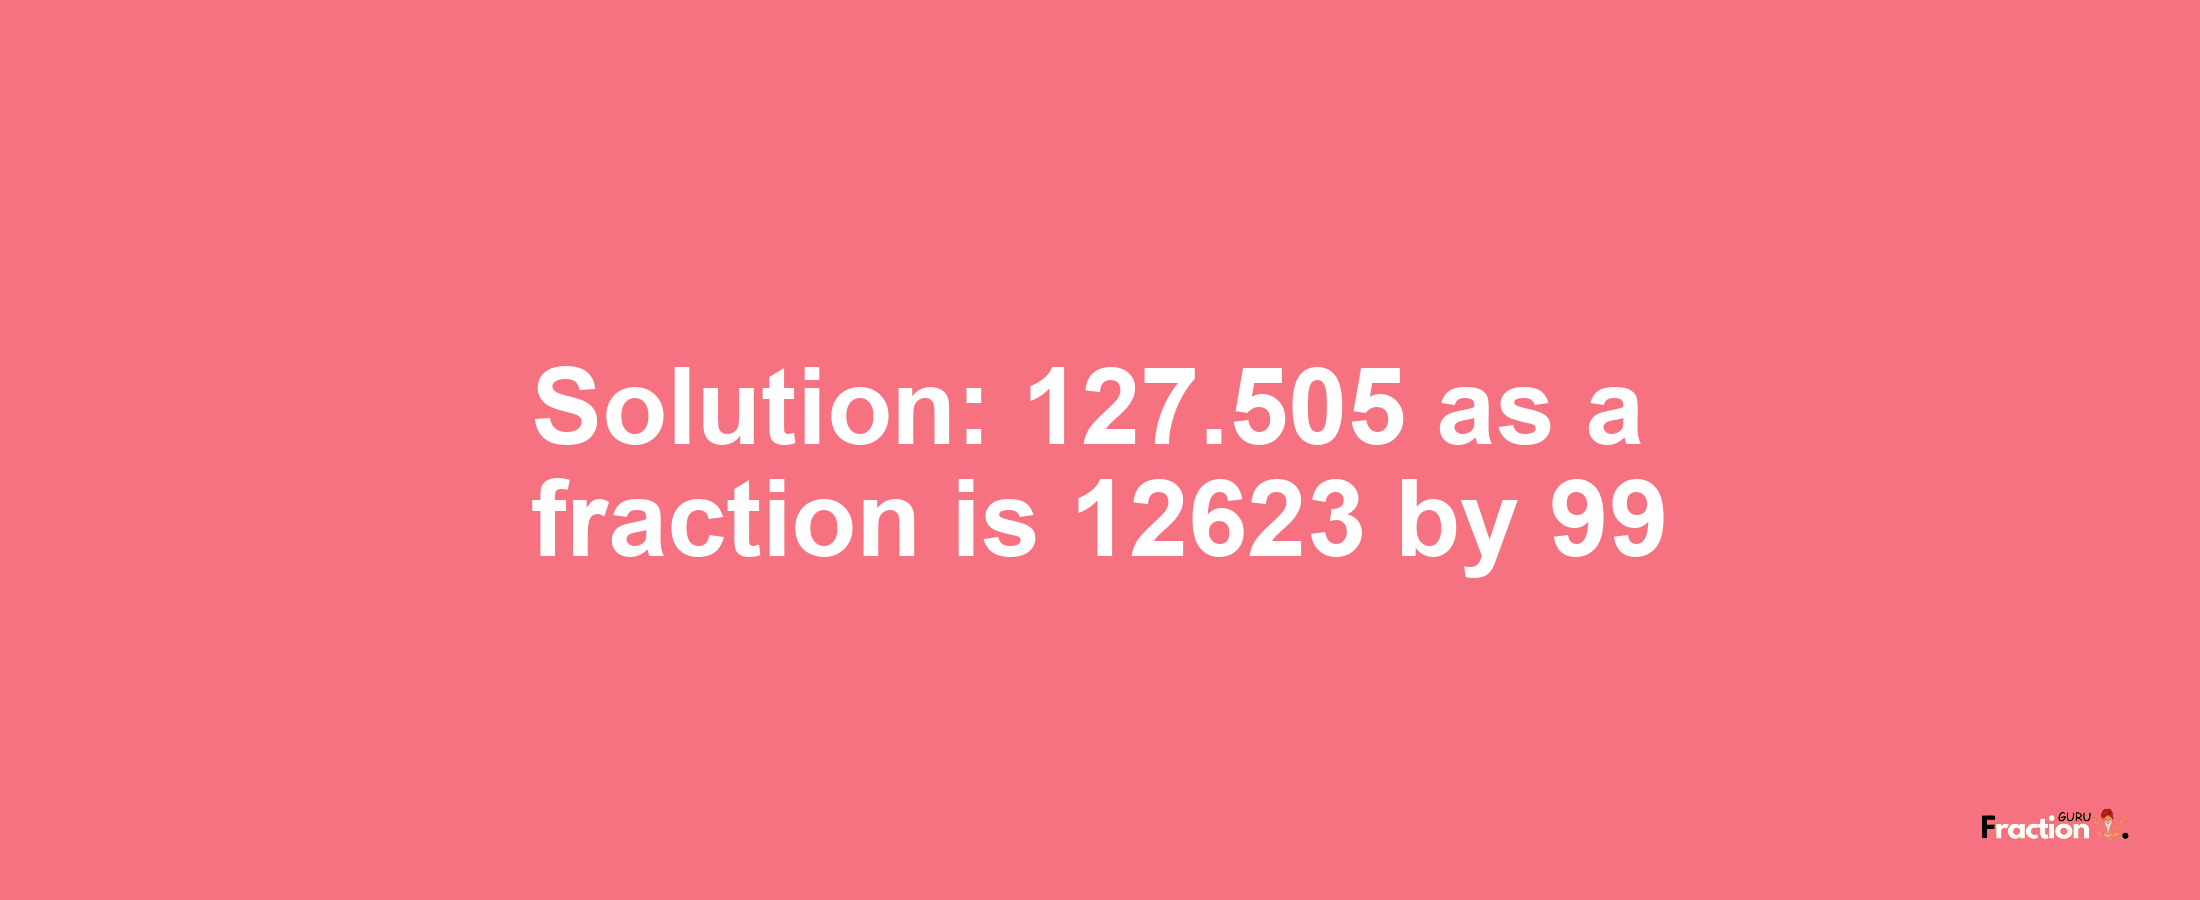 Solution:127.505 as a fraction is 12623/99